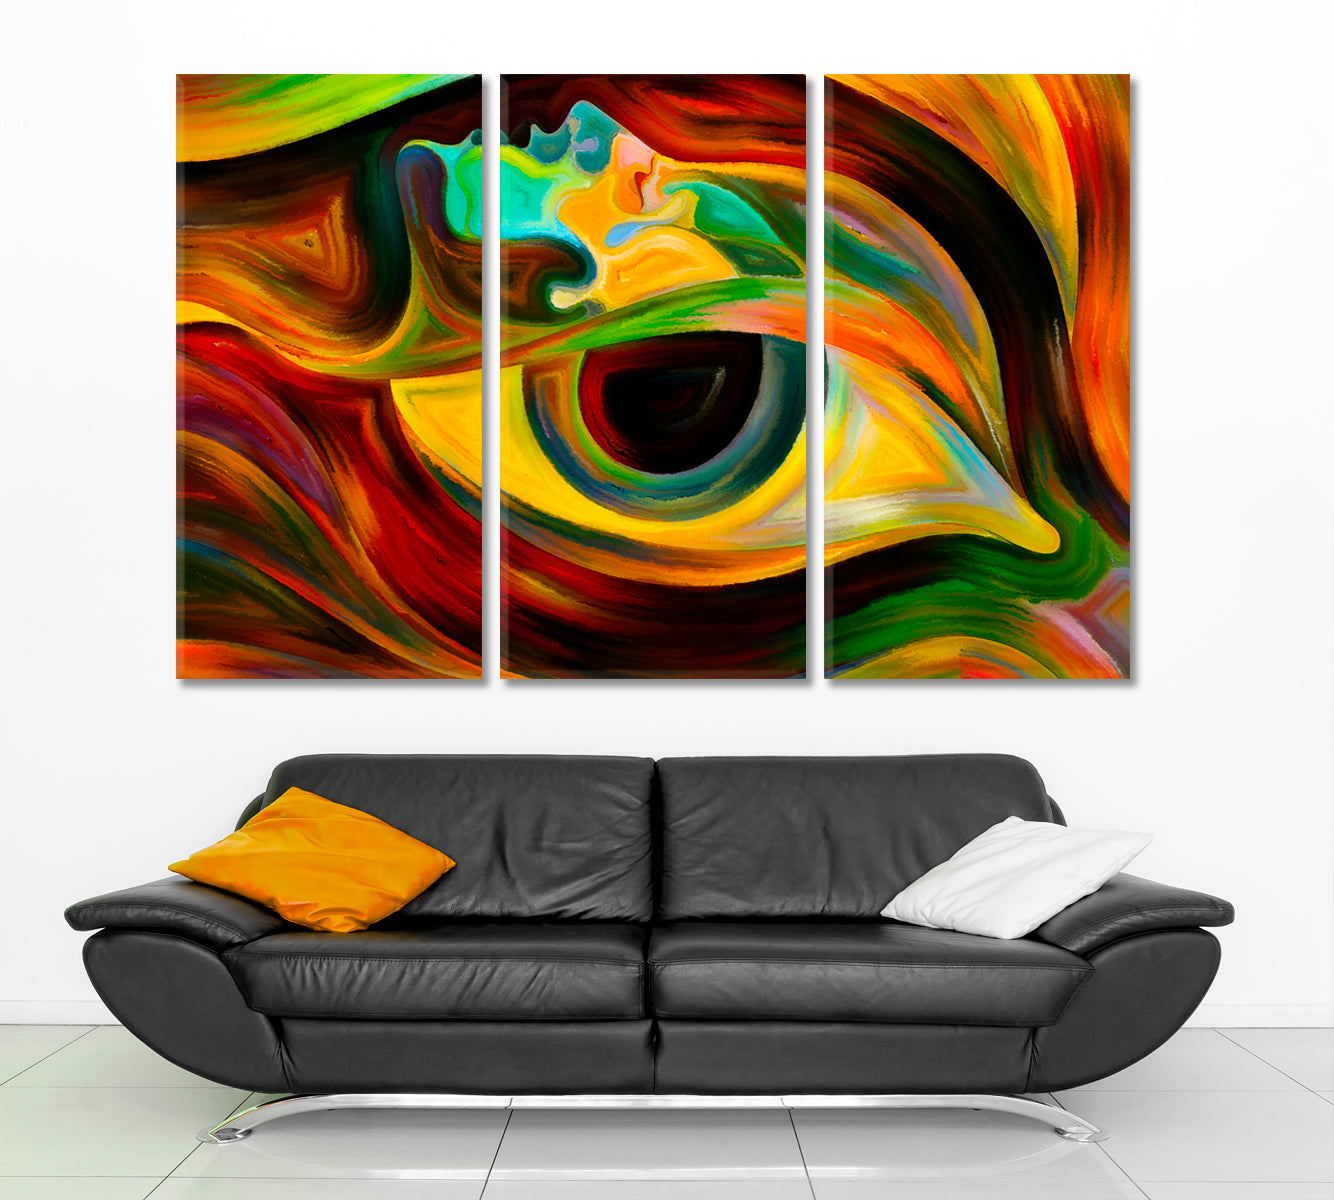 Abstract Colorful Human Face and Eye Consciousness Art Artesty 3 panels 36" x 24" 